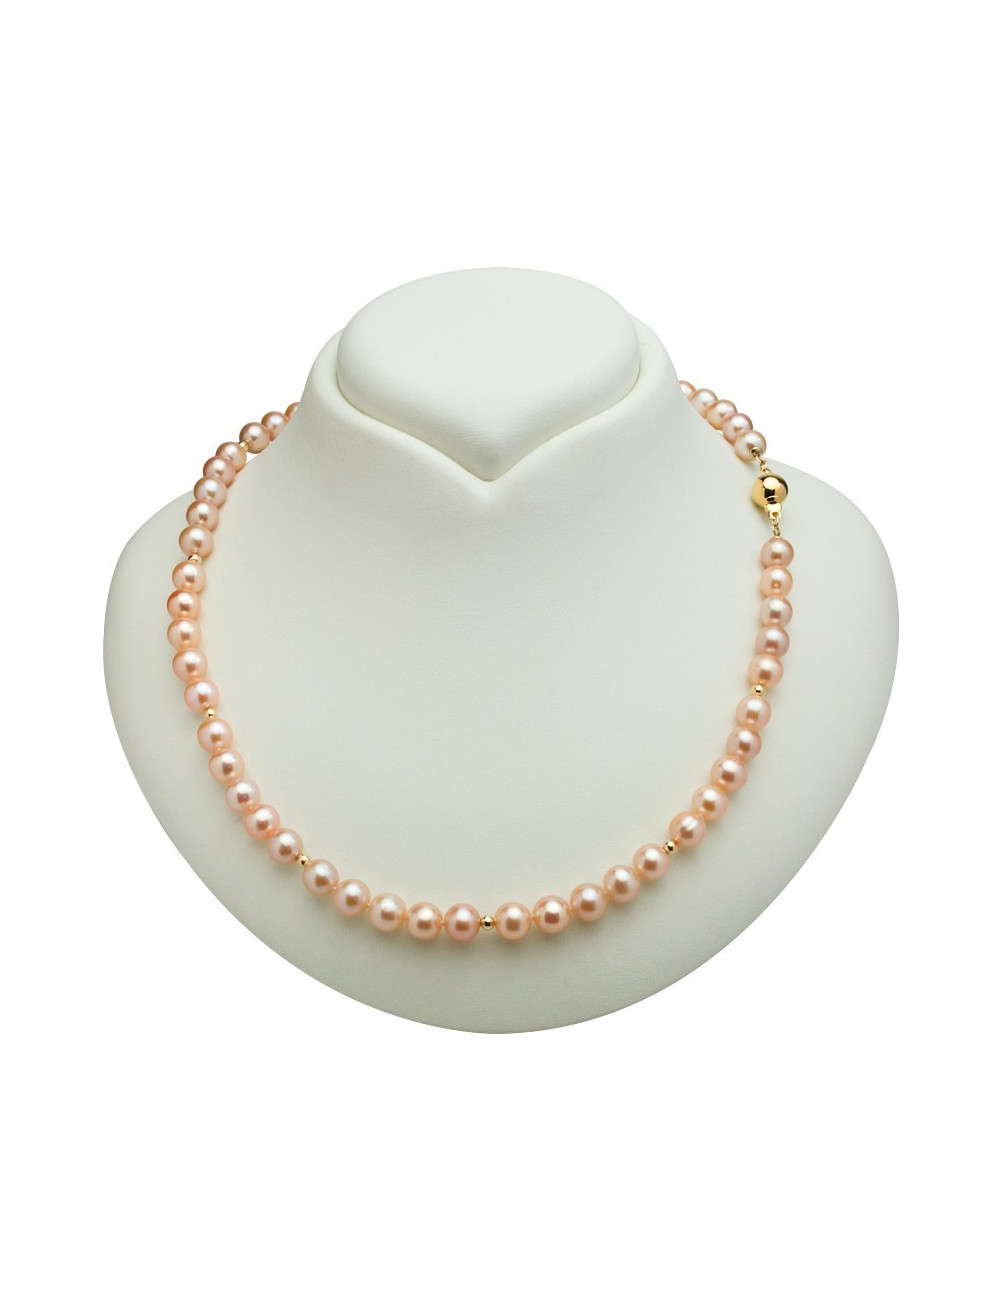 Necklace of pink pearls, decorated with gold ball-shaped elements B078kuG3